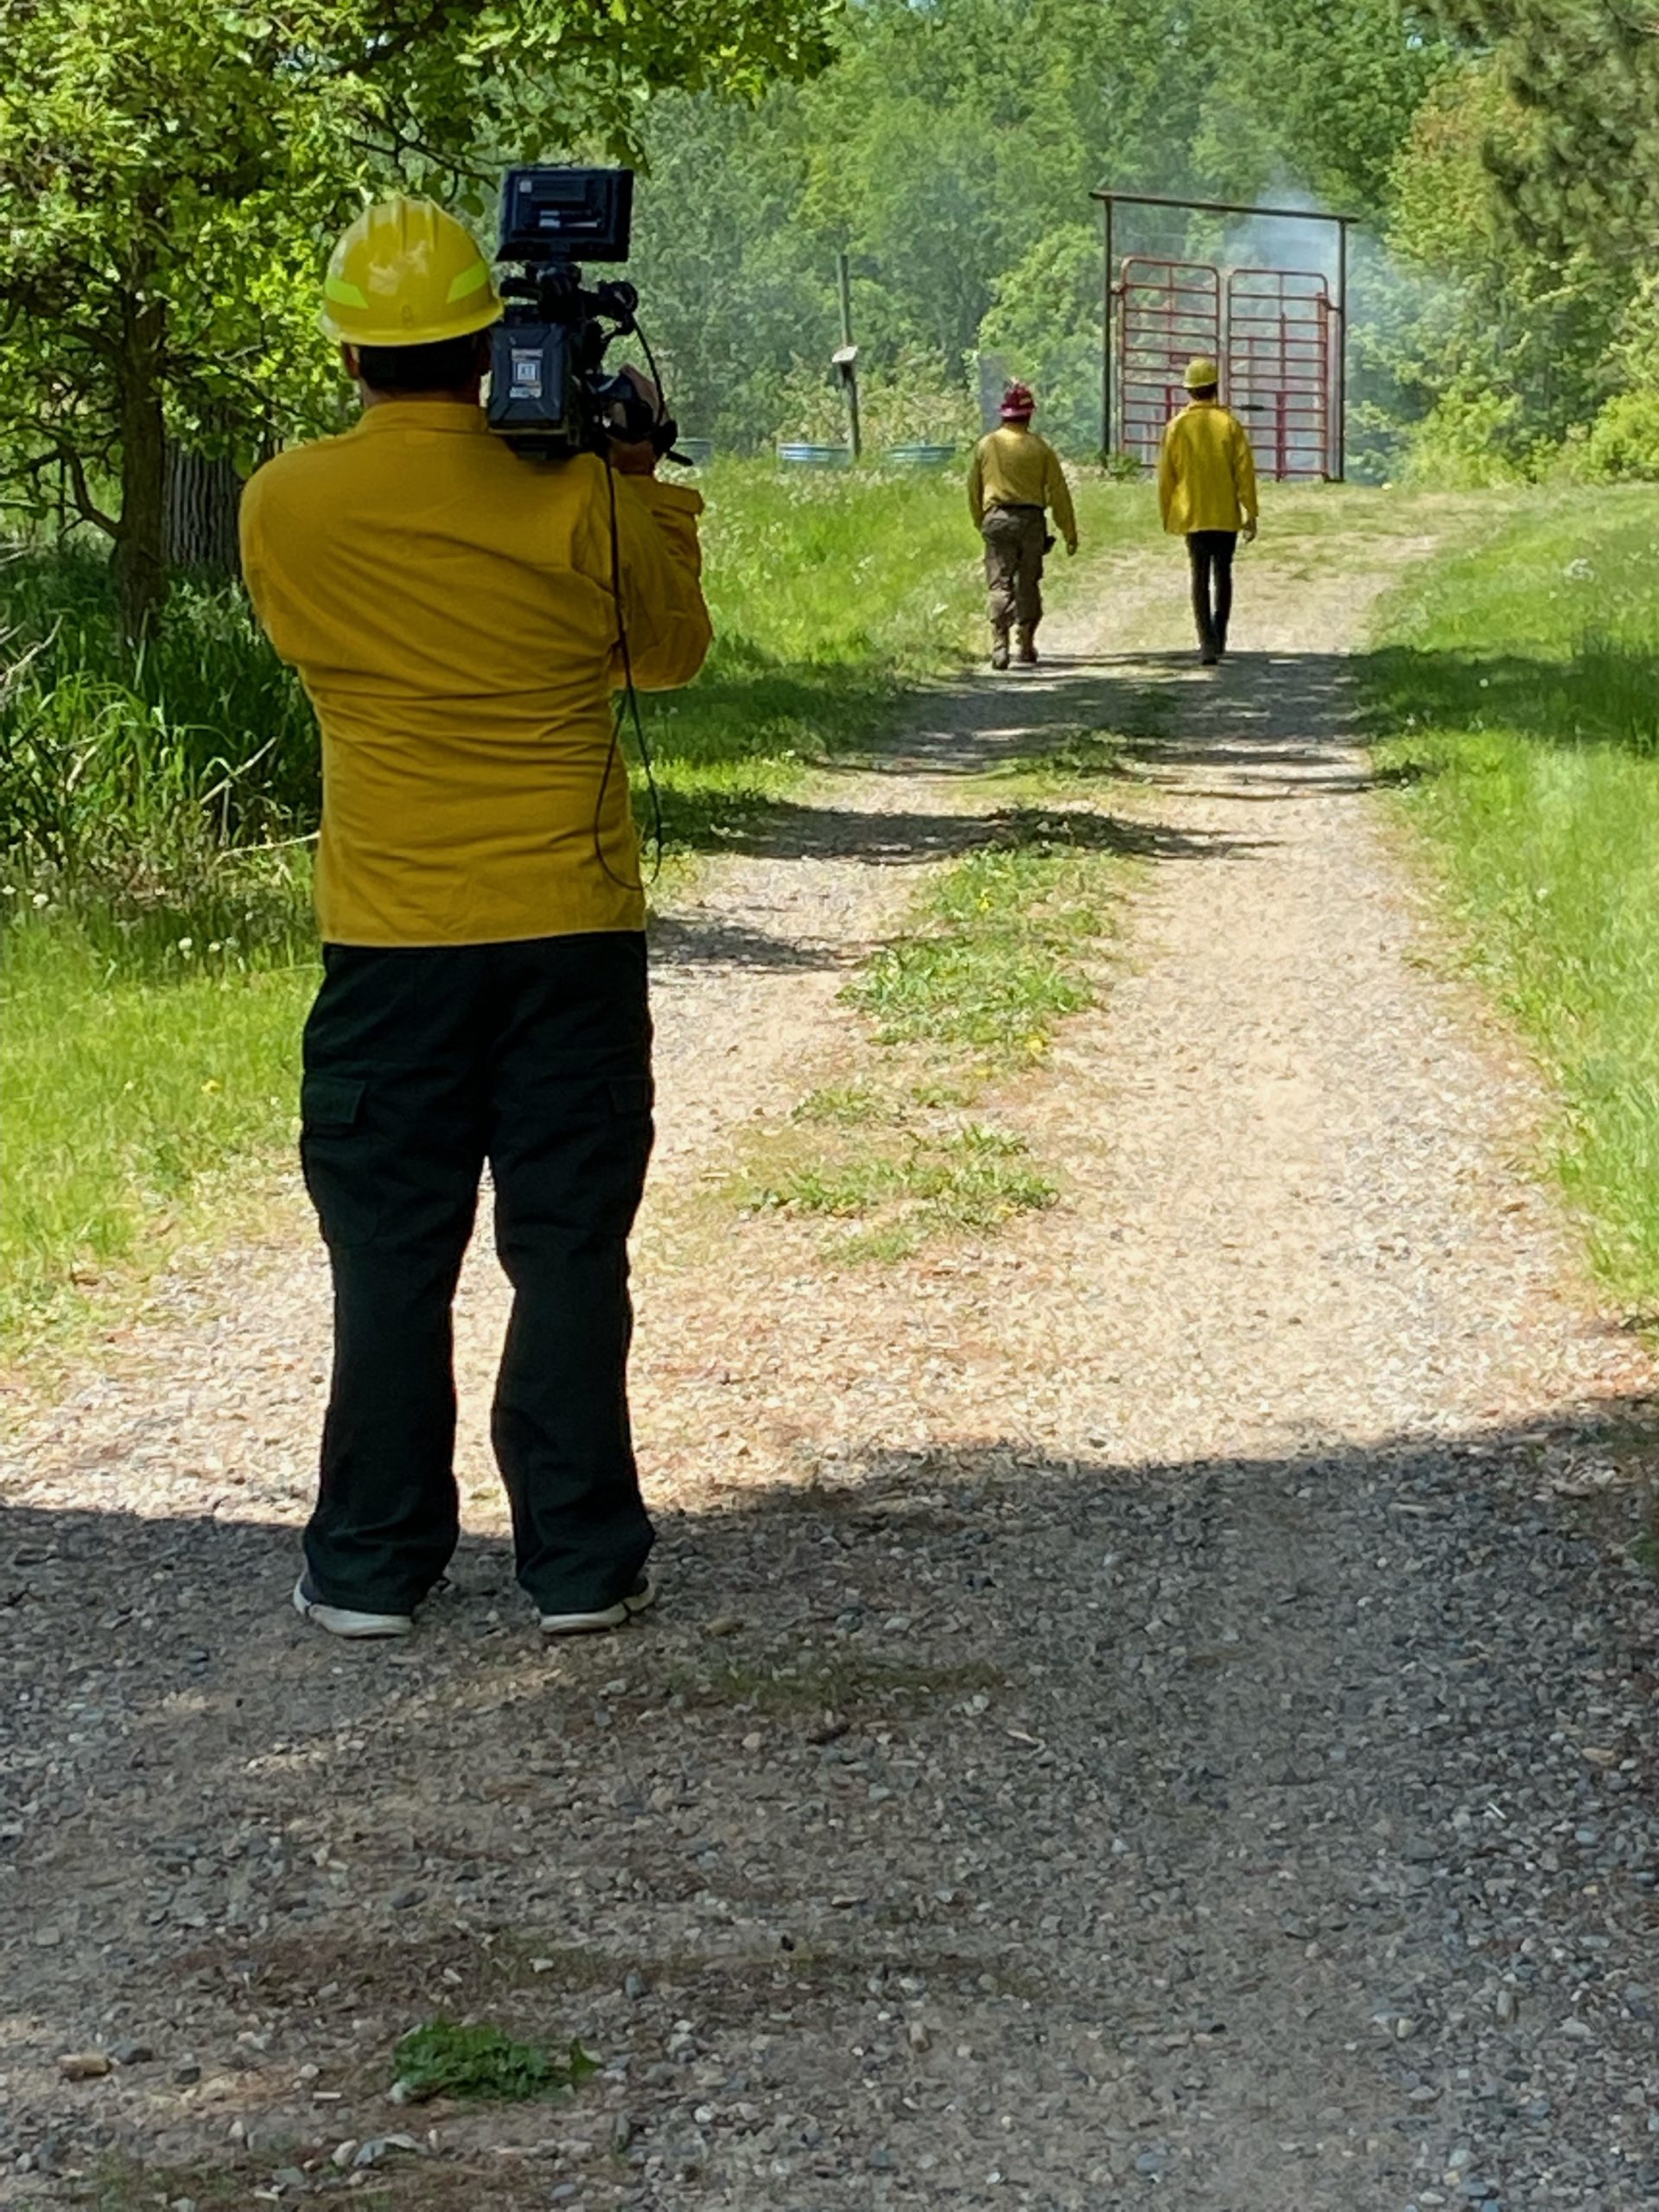 A person in a yellow shirt holding a large camera pointed at two people in yellow shirts walking down a dirt path.